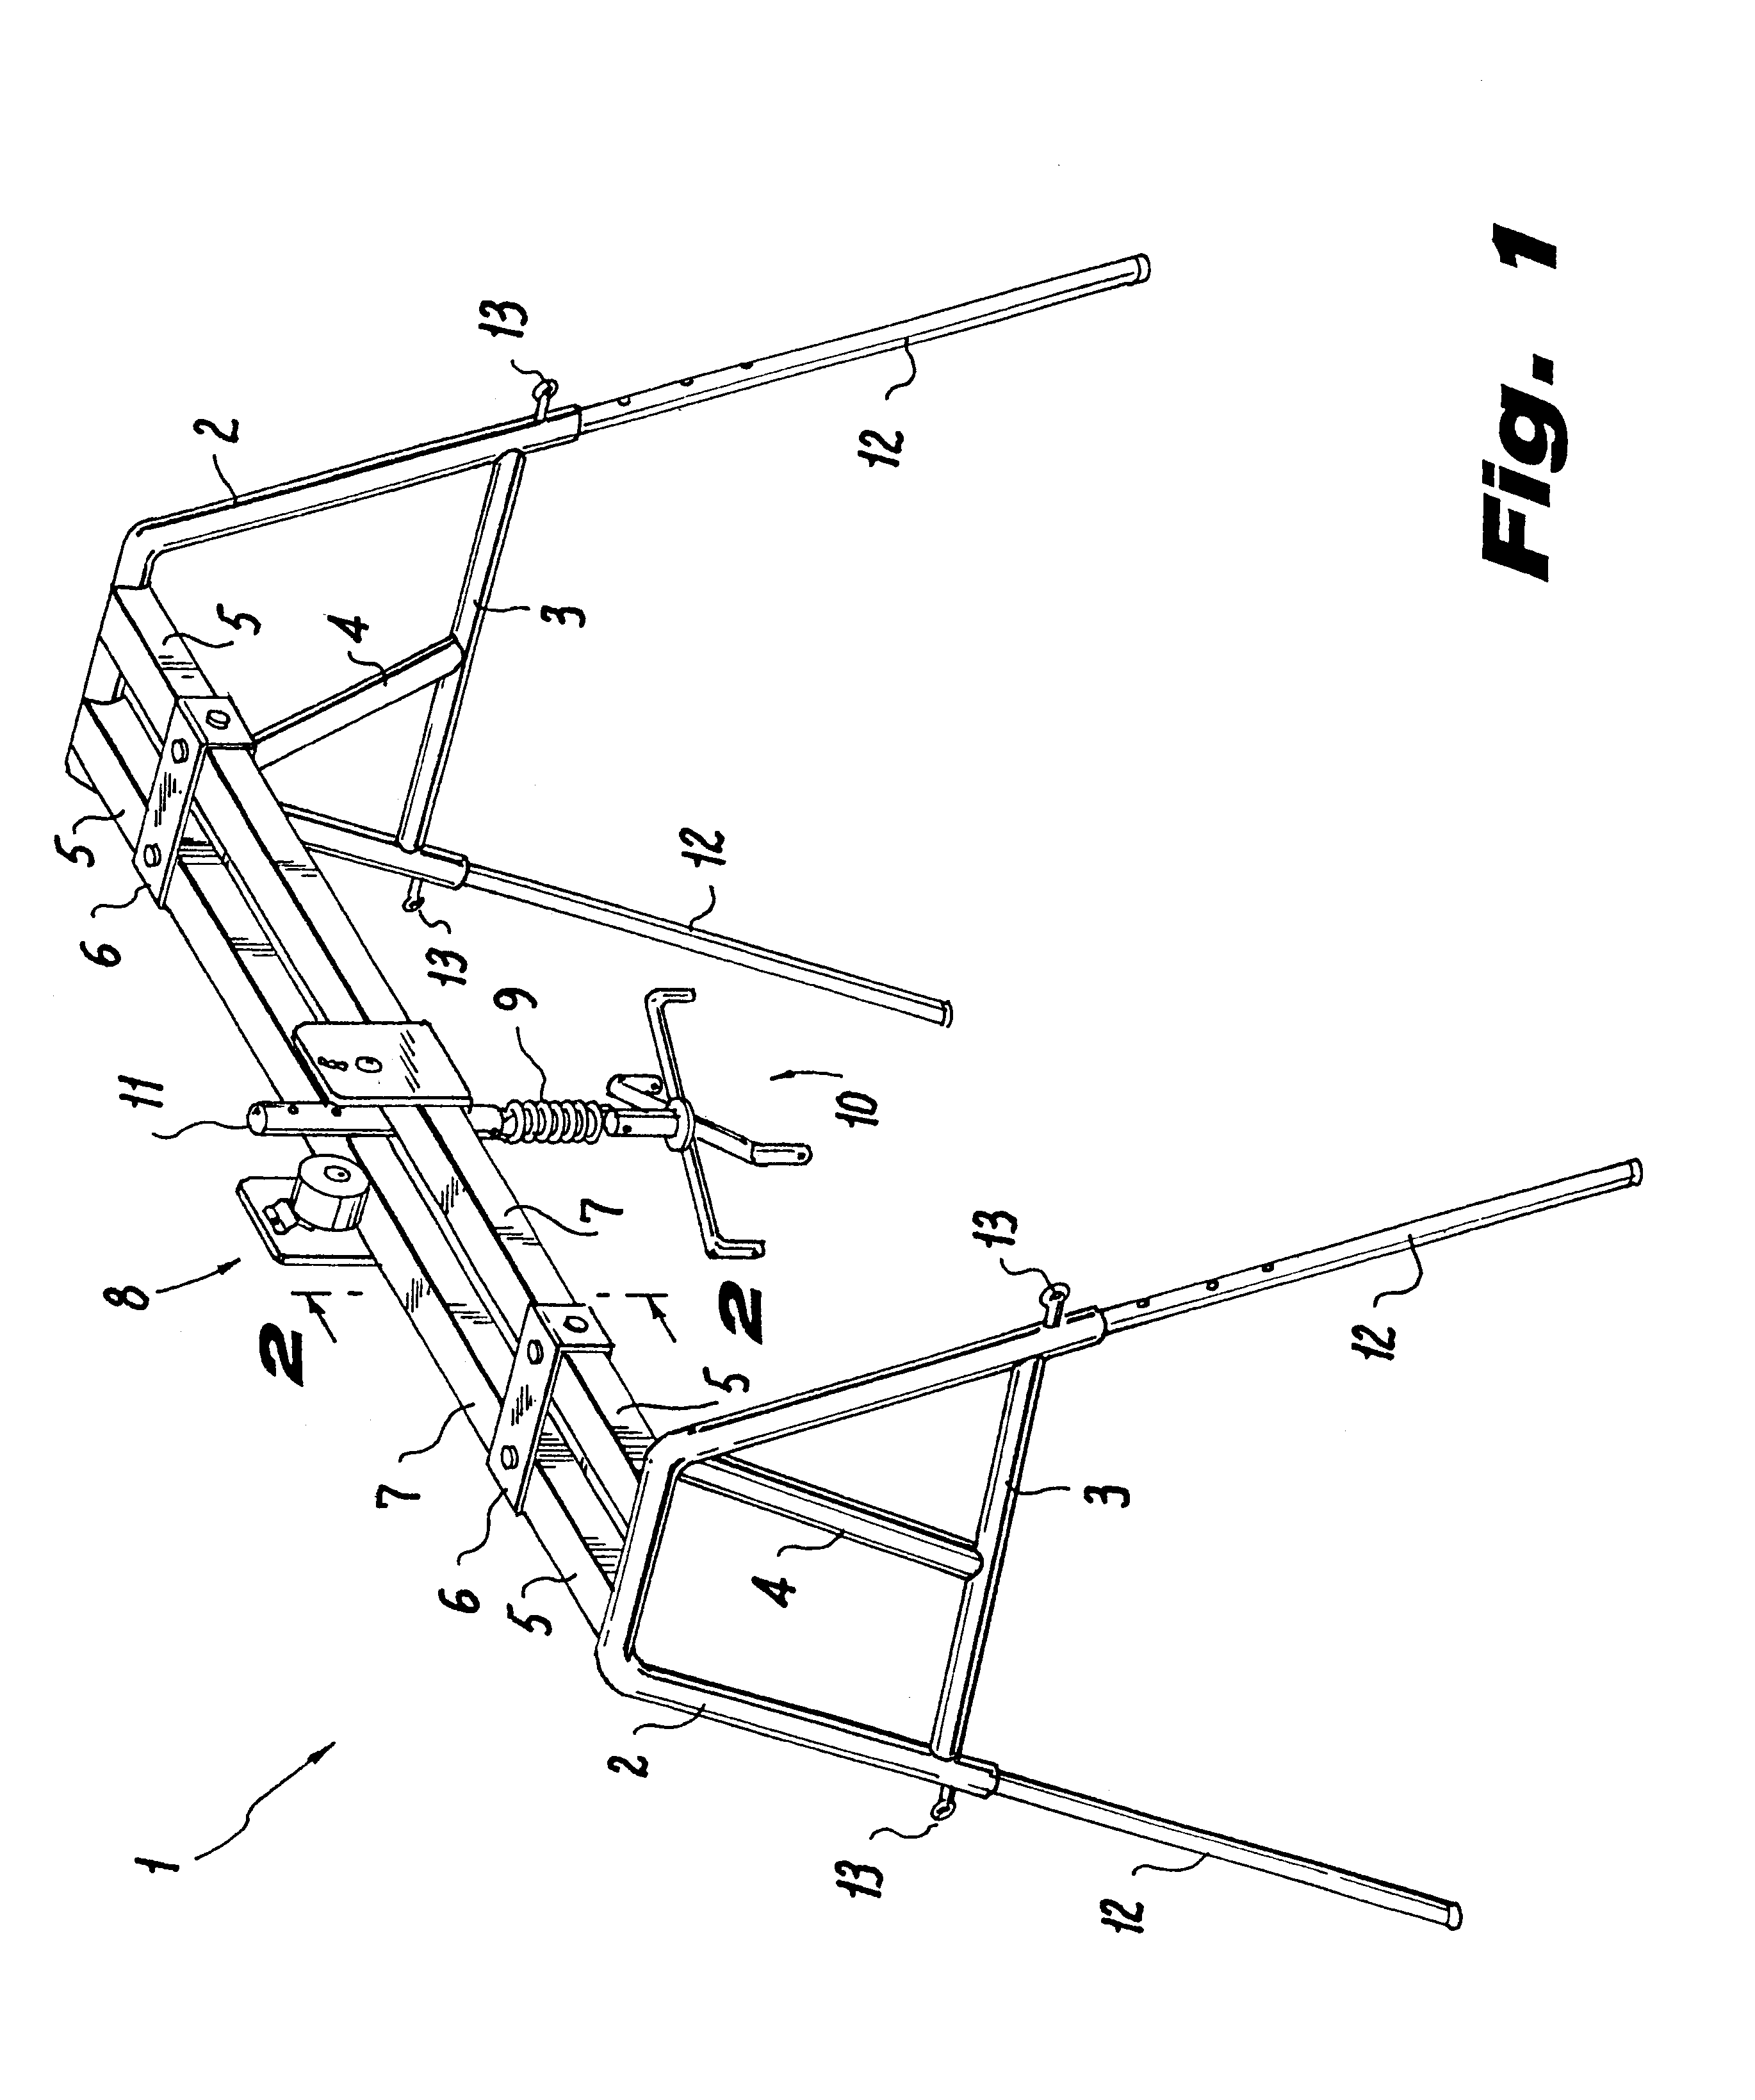 Method and apparatus to exercise developmentally delayed, physically and/or neurologically impaired persons